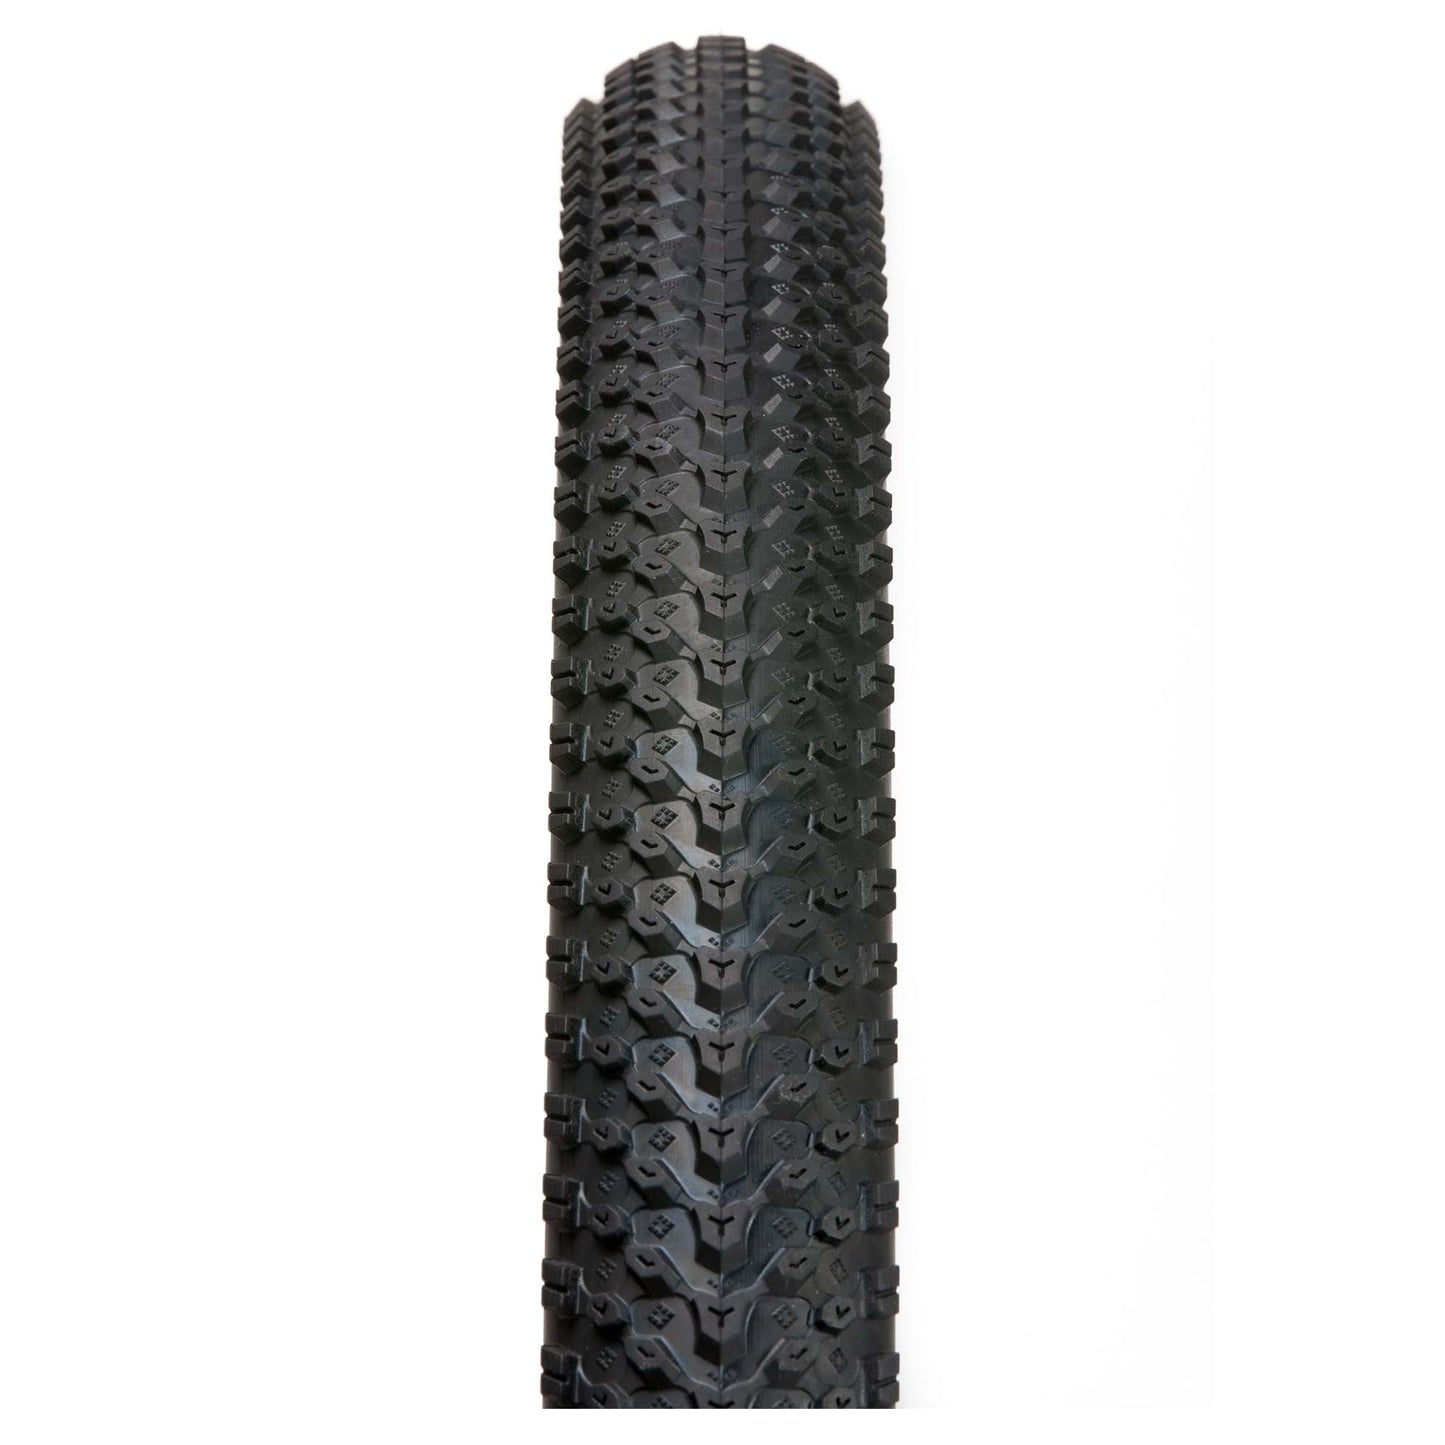 PANARACER COMET HARD PACK 29X2.10" WIRED TYRE